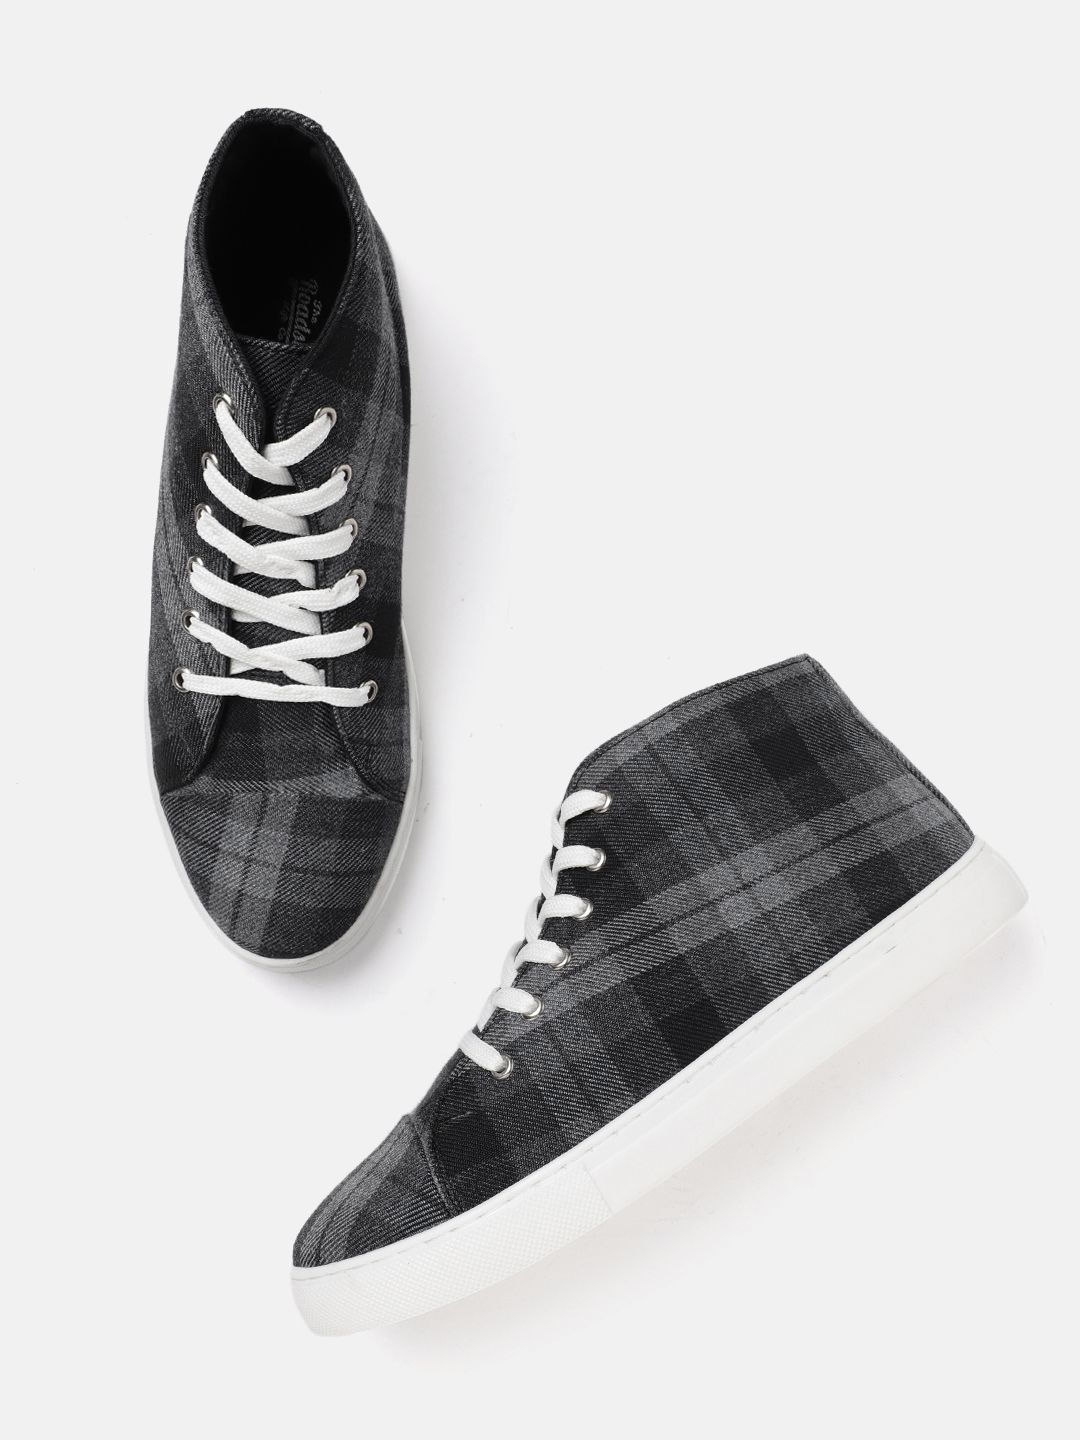 The Roadster Lifestyle Co Women Black & Charcoal Grey Mid-Top Checked Sneakers Price in India